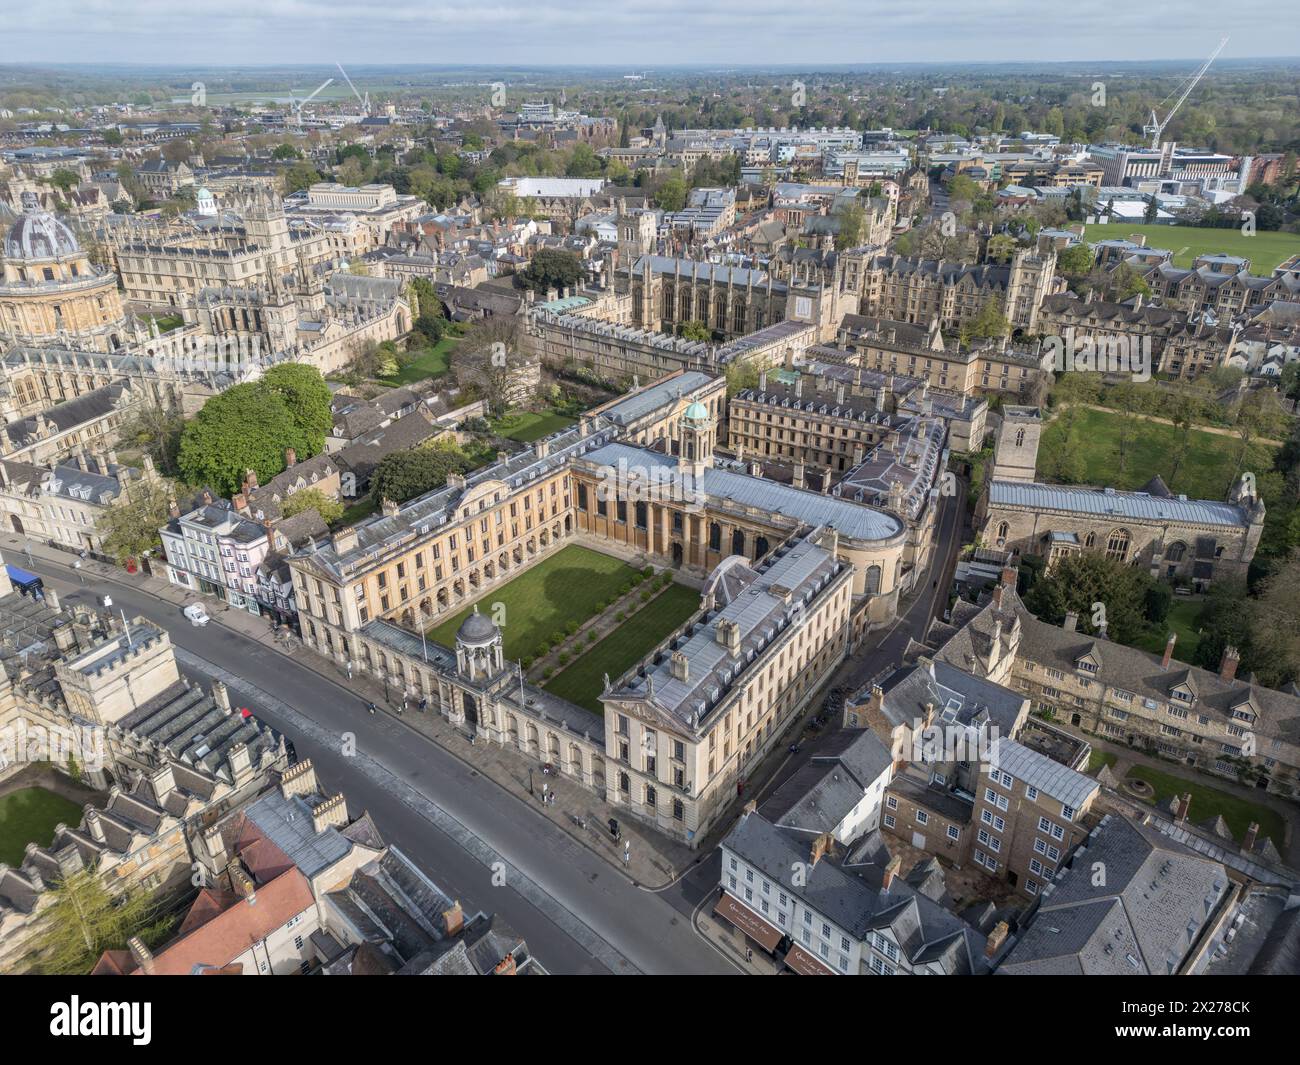 Aerial view of The Queen's College, University of Oxford, Oxford, UK. Stock Photo